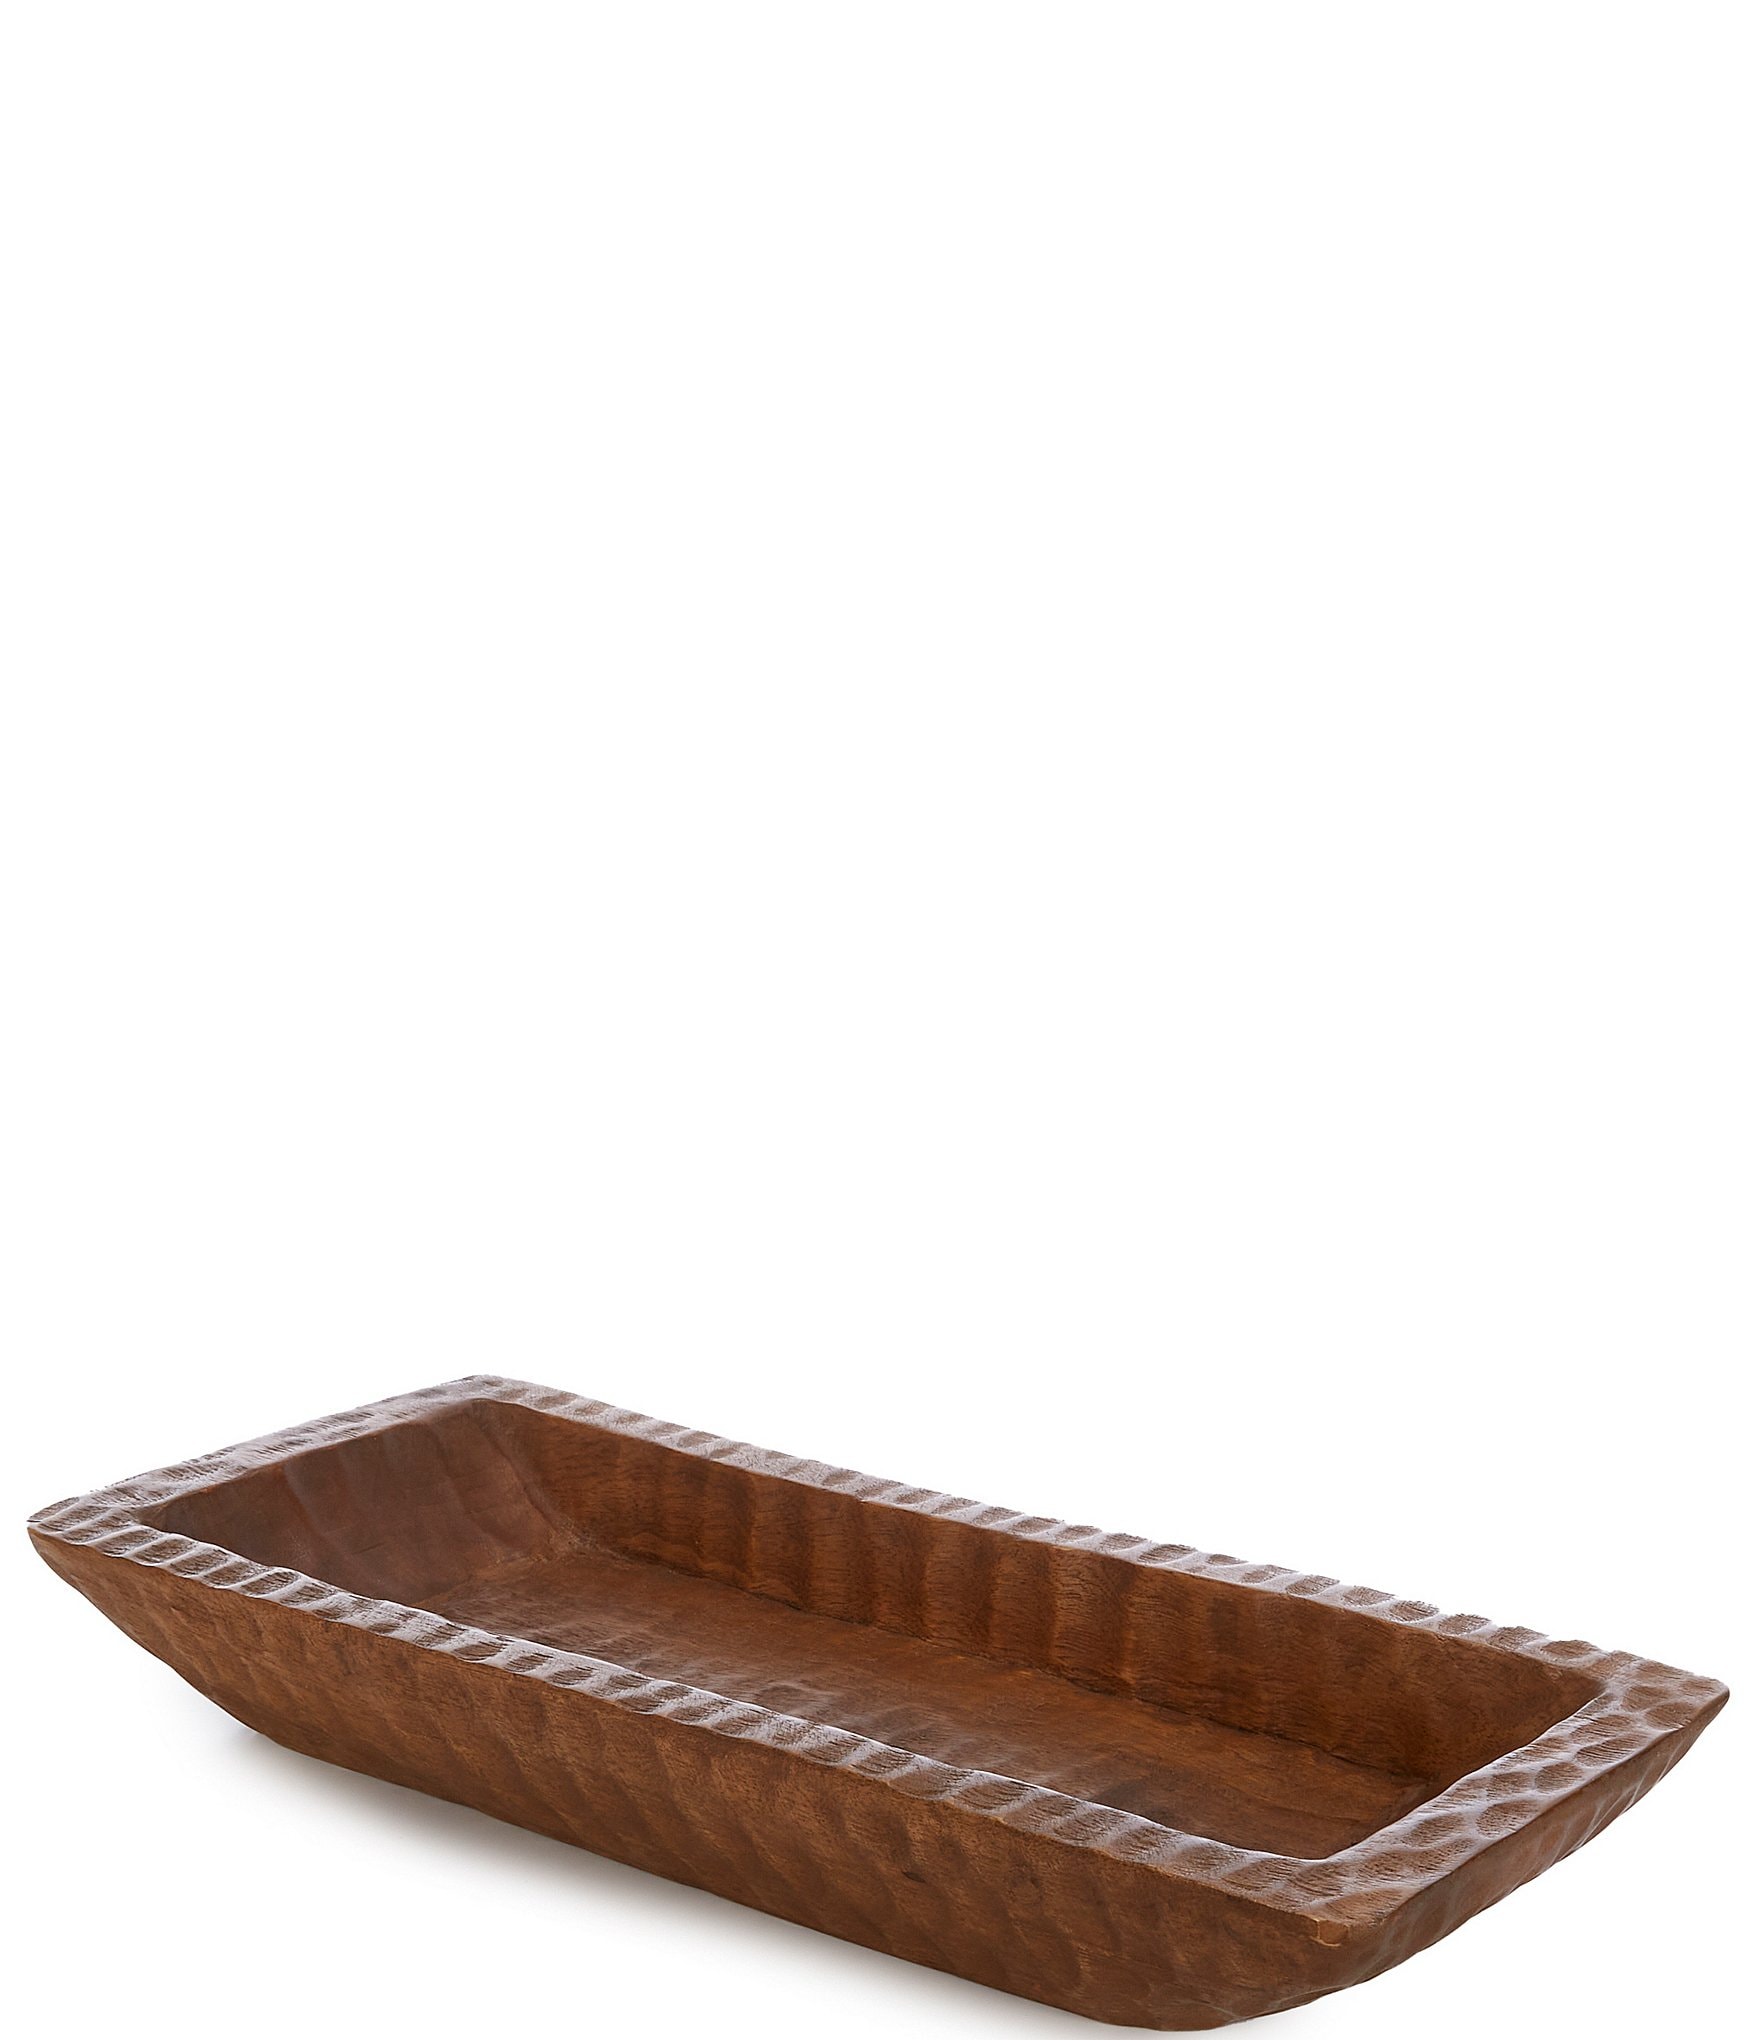 https://dimg.dillards.com/is/image/DillardsZoom/zoom/southern-living-simplicity-collection-wood-hand-carved-dough-bowl/00000000_zi_00558da6-2951-4a22-969a-9725c27b2032.jpg